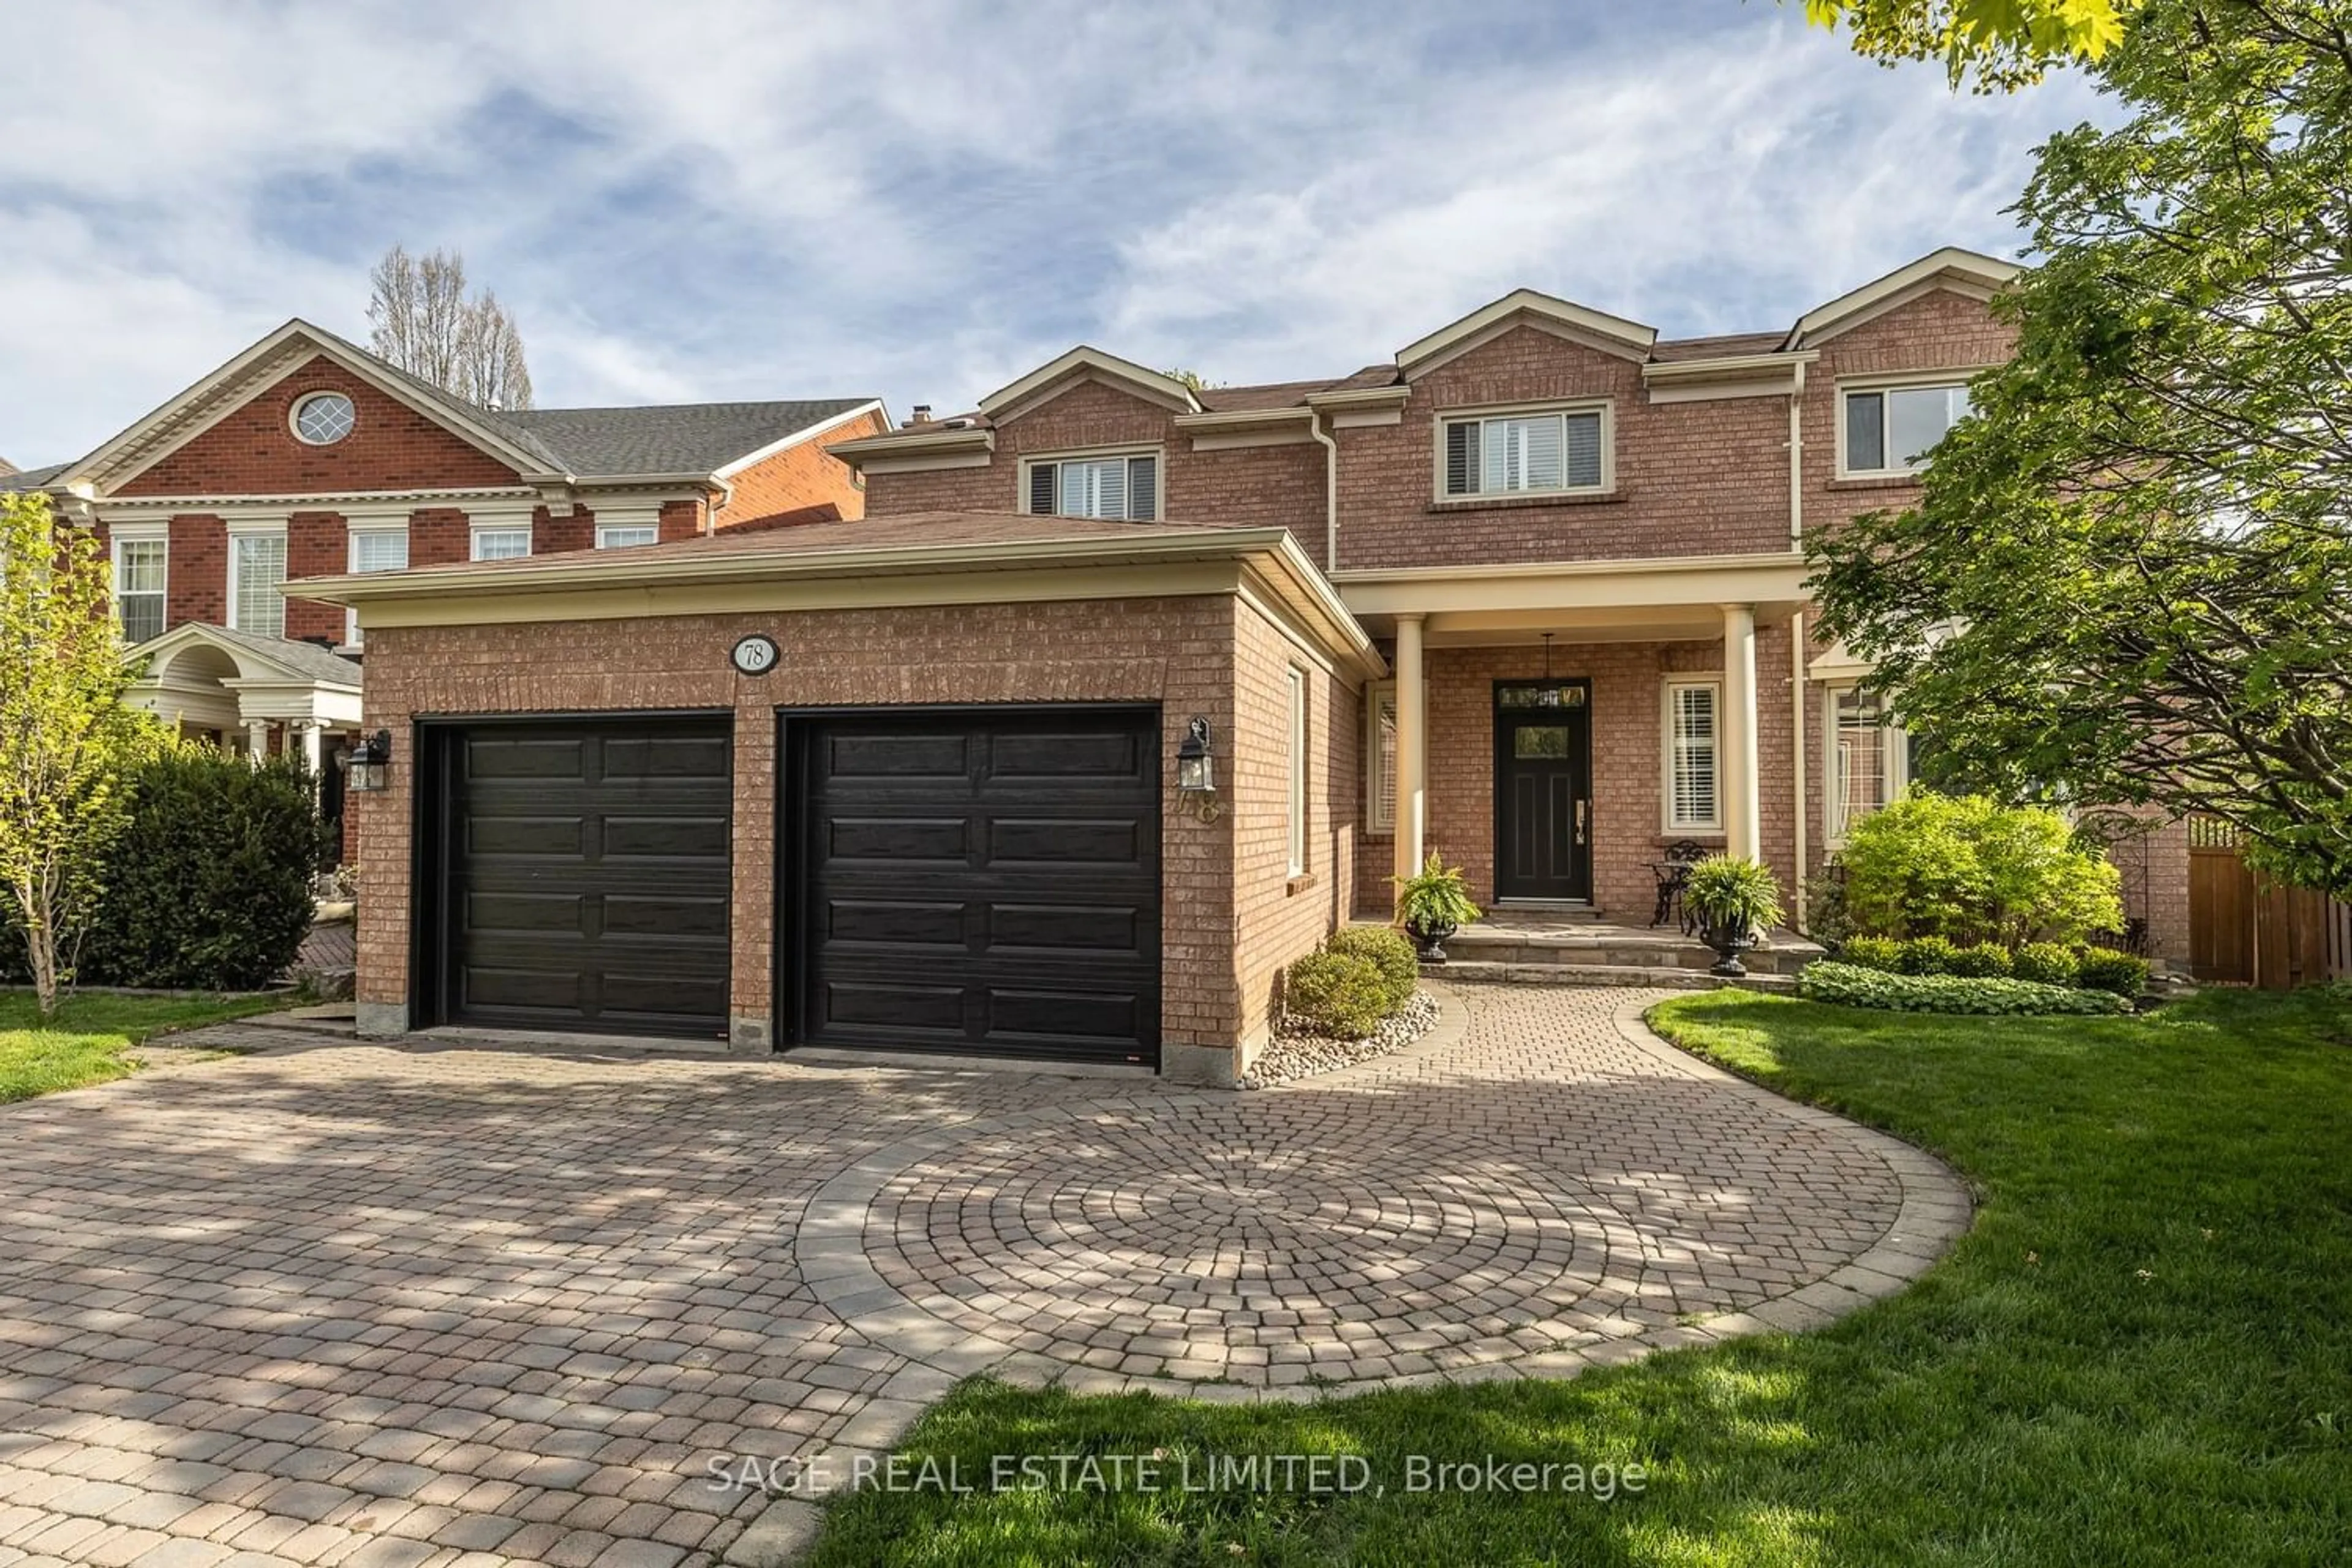 Home with brick exterior material for 78 Gatcombe Circ, Richmond Hill Ontario L4C 9P4